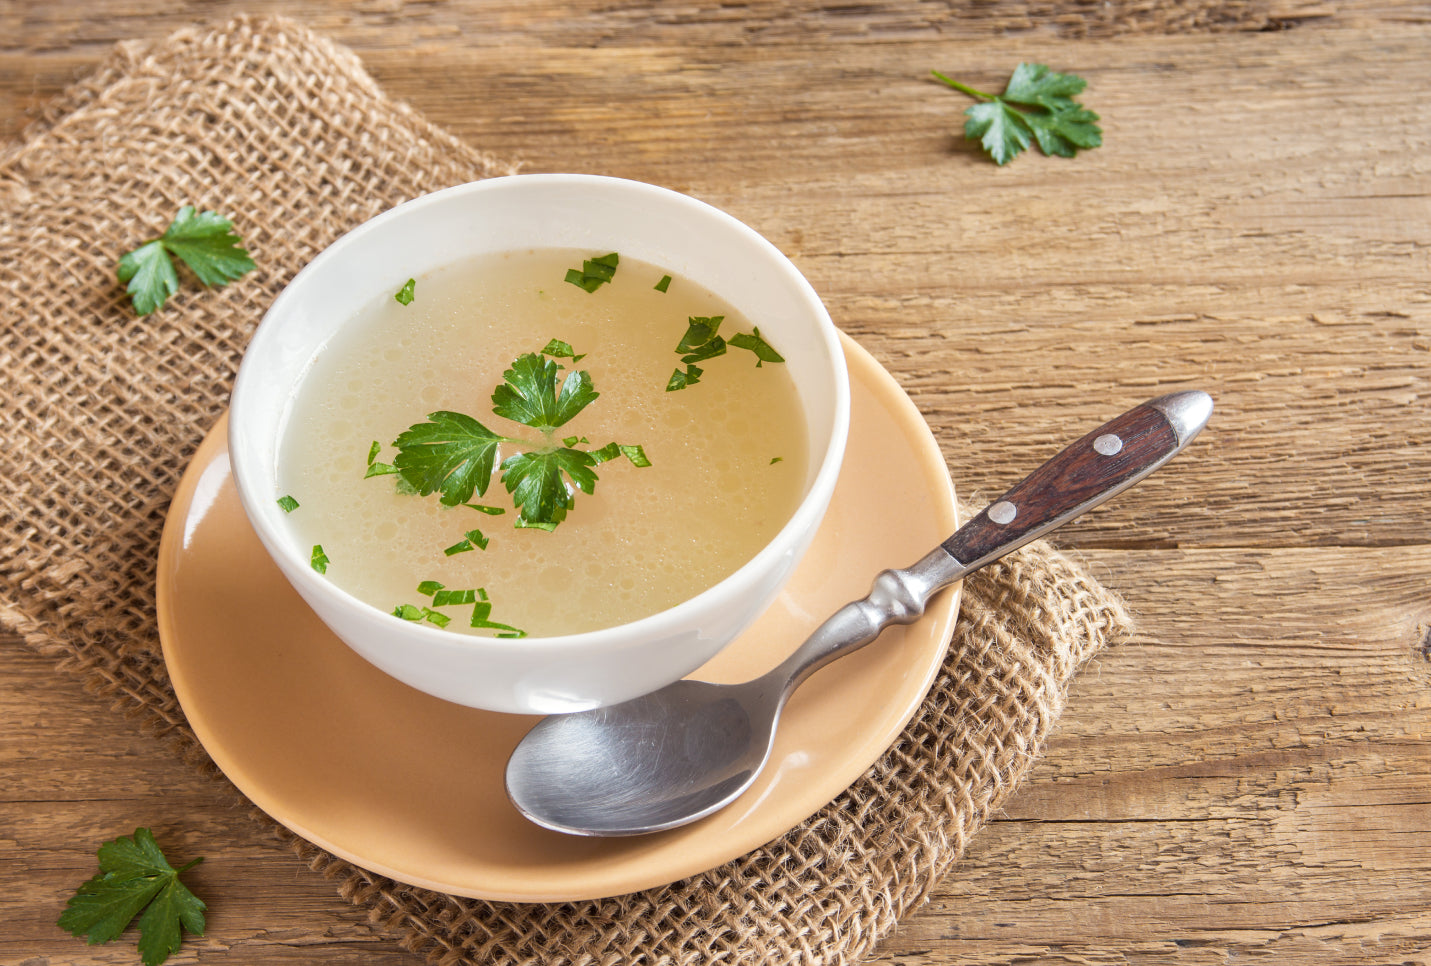 Bone Broth Benefits for Skin, Gut Health, and More